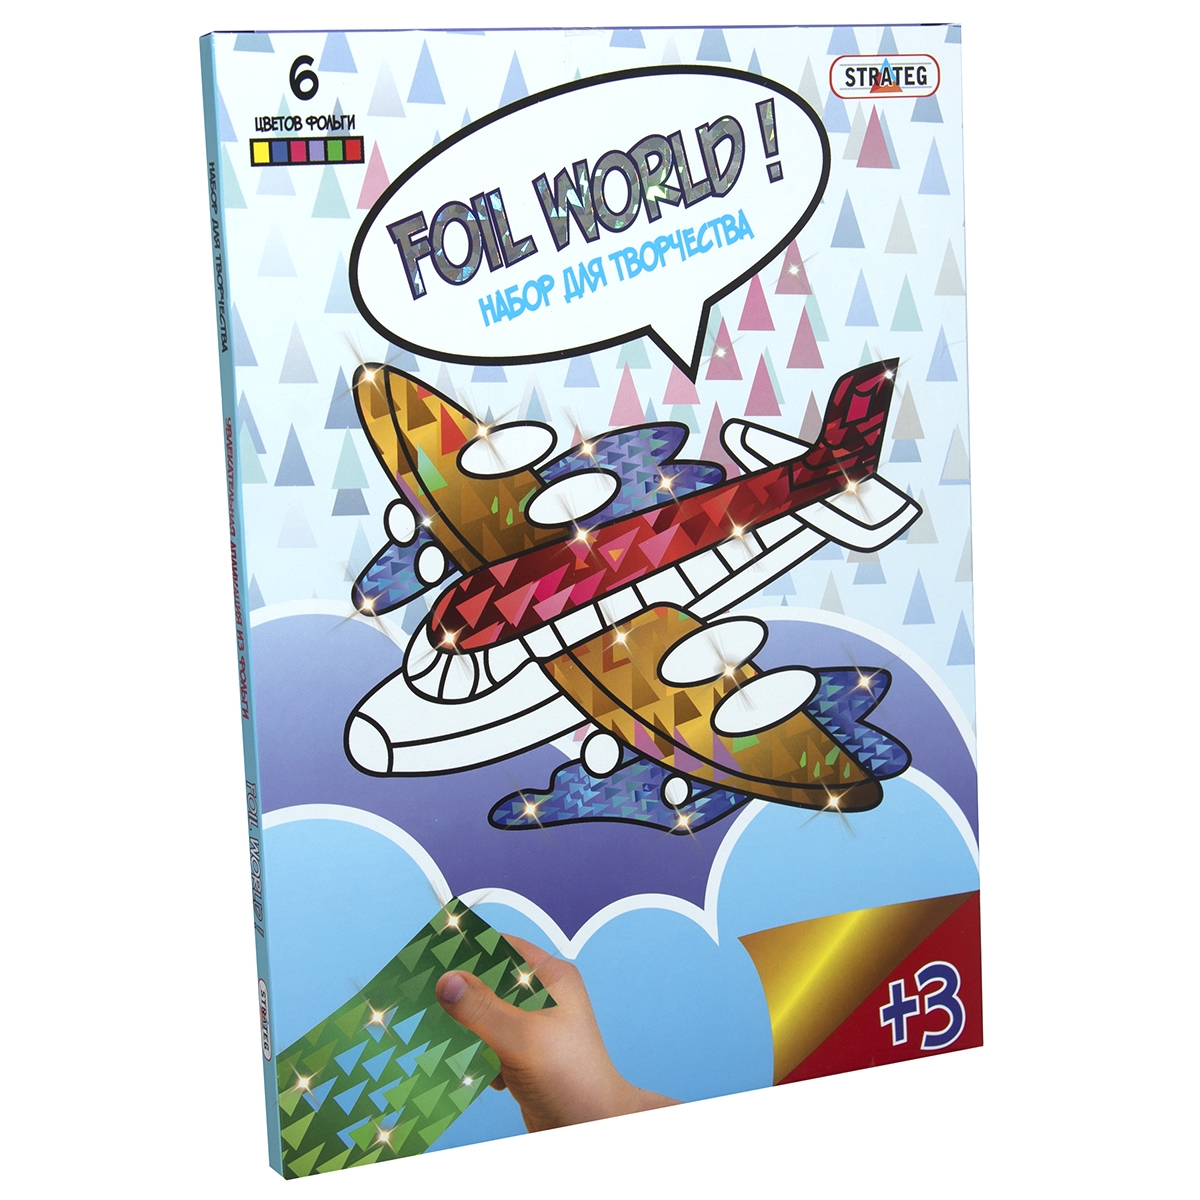 Foil World Foil Picture "Airplane" (Russian) (700-2)